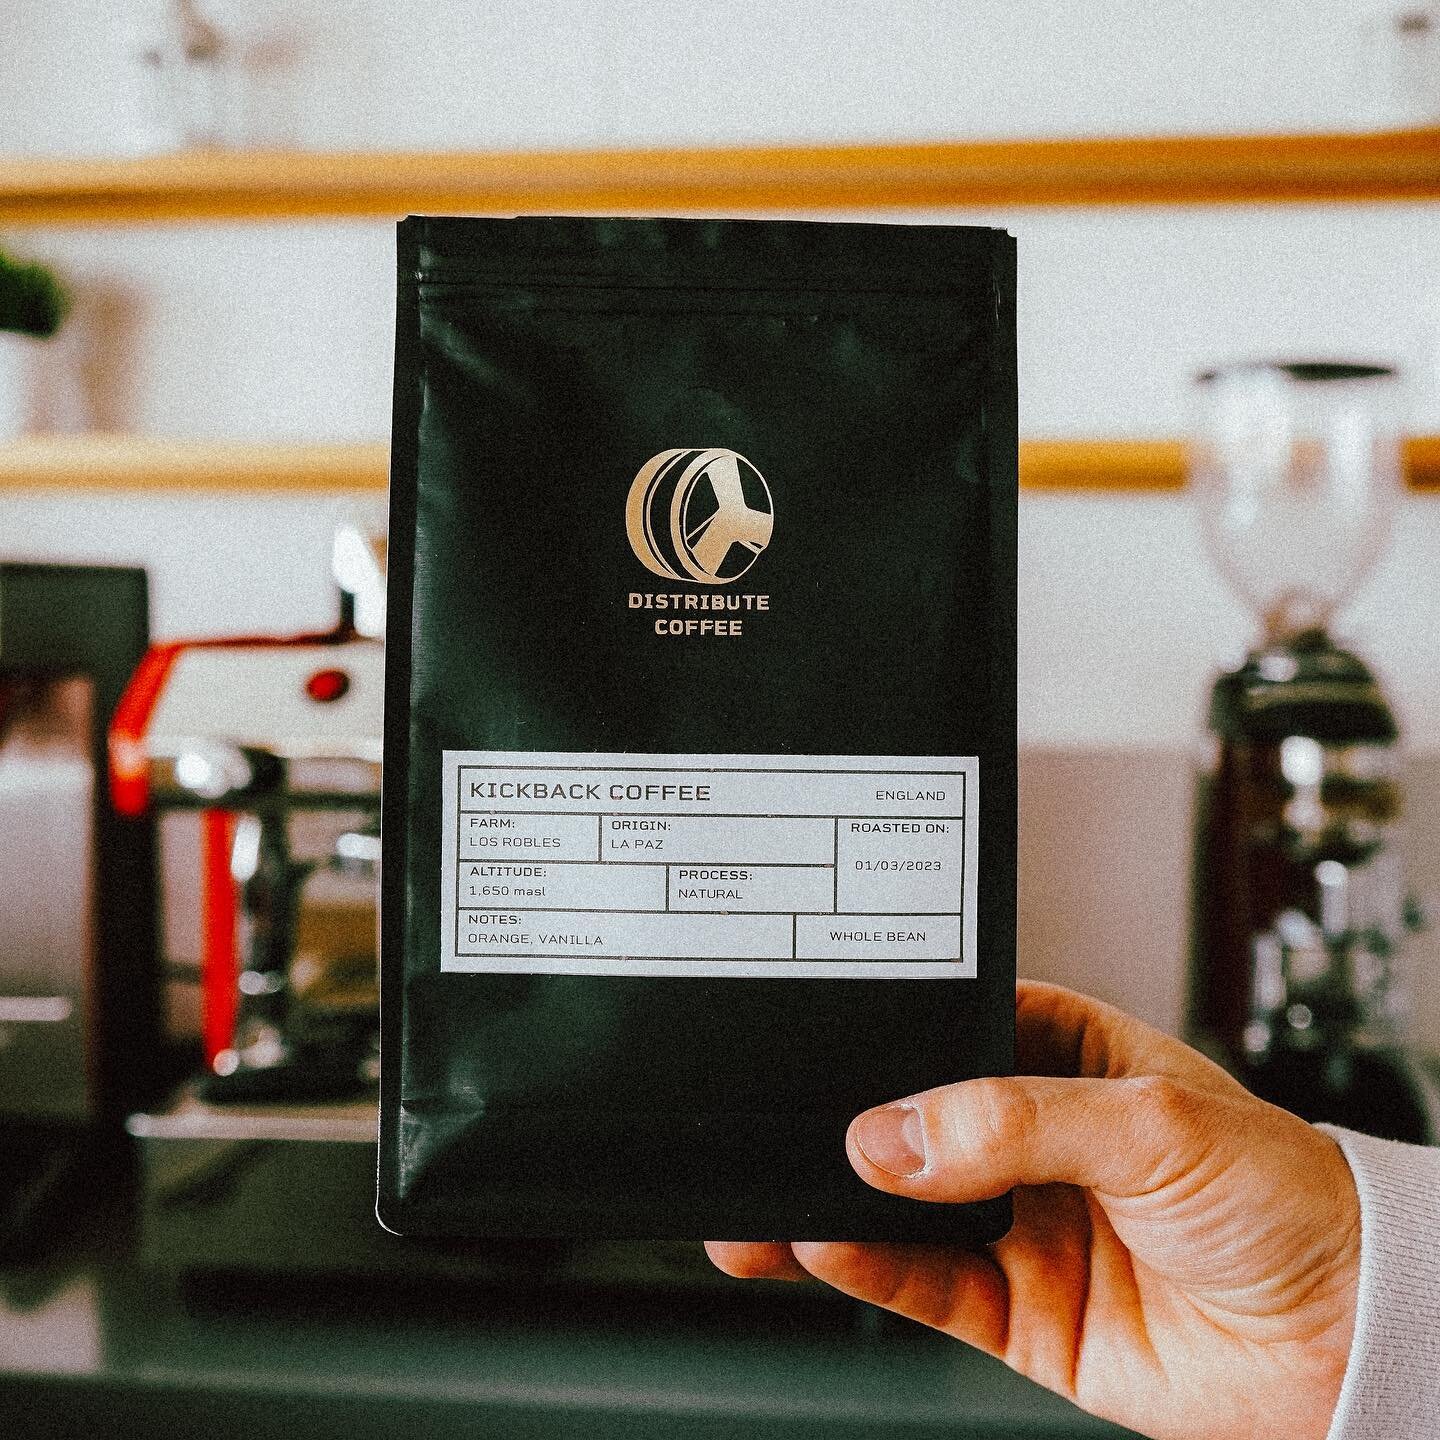 REMNANT 👉 @distributecoffee ☕️

Huge thanks in advance to our friends in the north coast @distributecoffee for sending us some great coffee for our first gathering this Saturday night! If you don&rsquo;t know much about these guys and their start-up